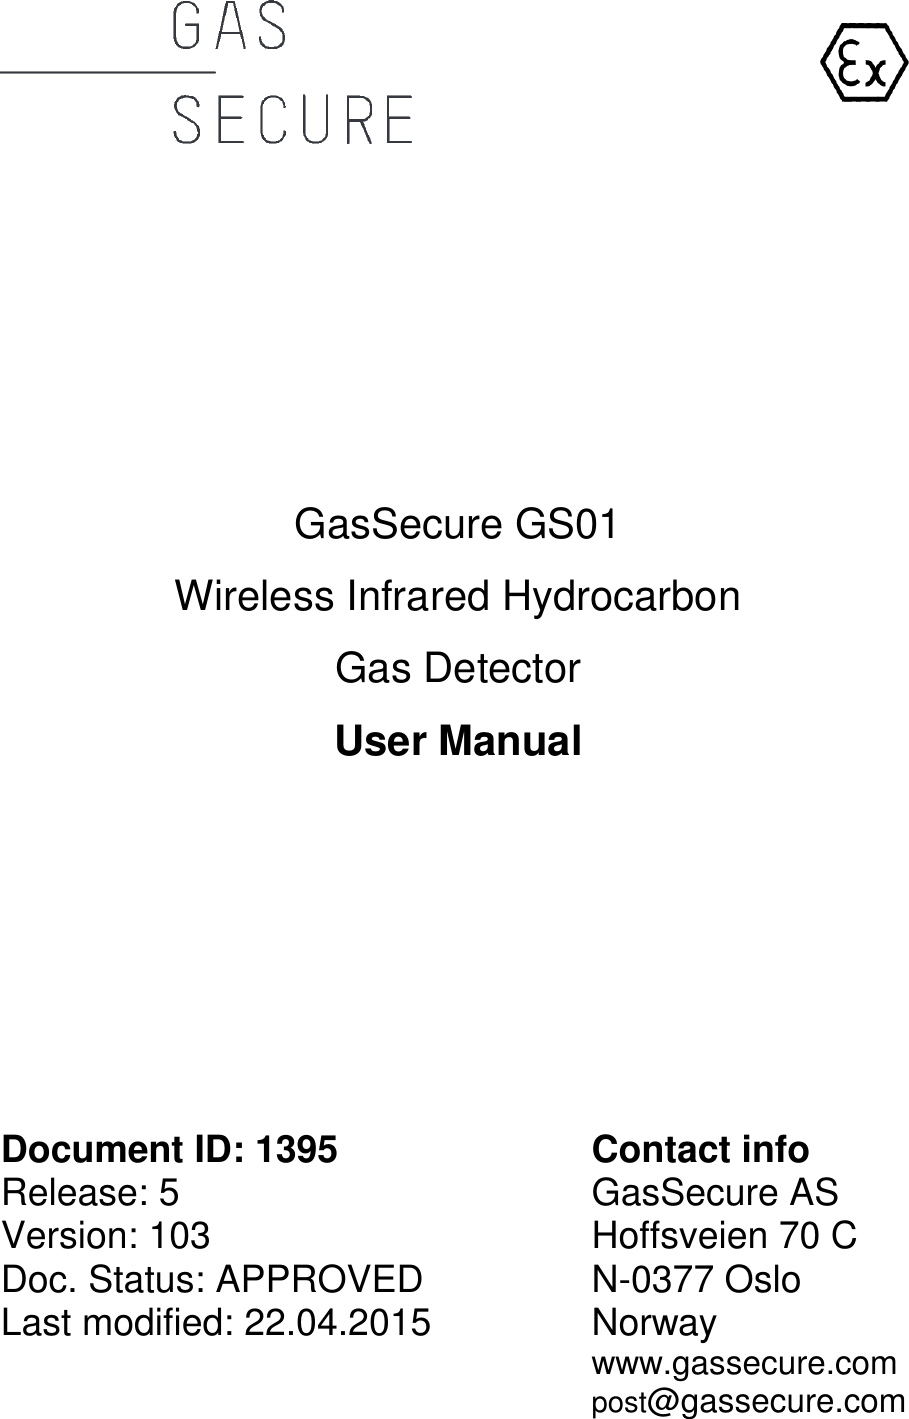                                                                    GasSecure GS01 Wireless Infrared Hydrocarbon Gas Detector User Manual           Document ID: 1395  Contact info Release: 5    GasSecure AS Version: 103    Hoffsveien 70 C Doc. Status: APPROVED  N-0377 Oslo Last modified: 22.04.2015  Norway     www.gassecure.com     post@gassecure.com          